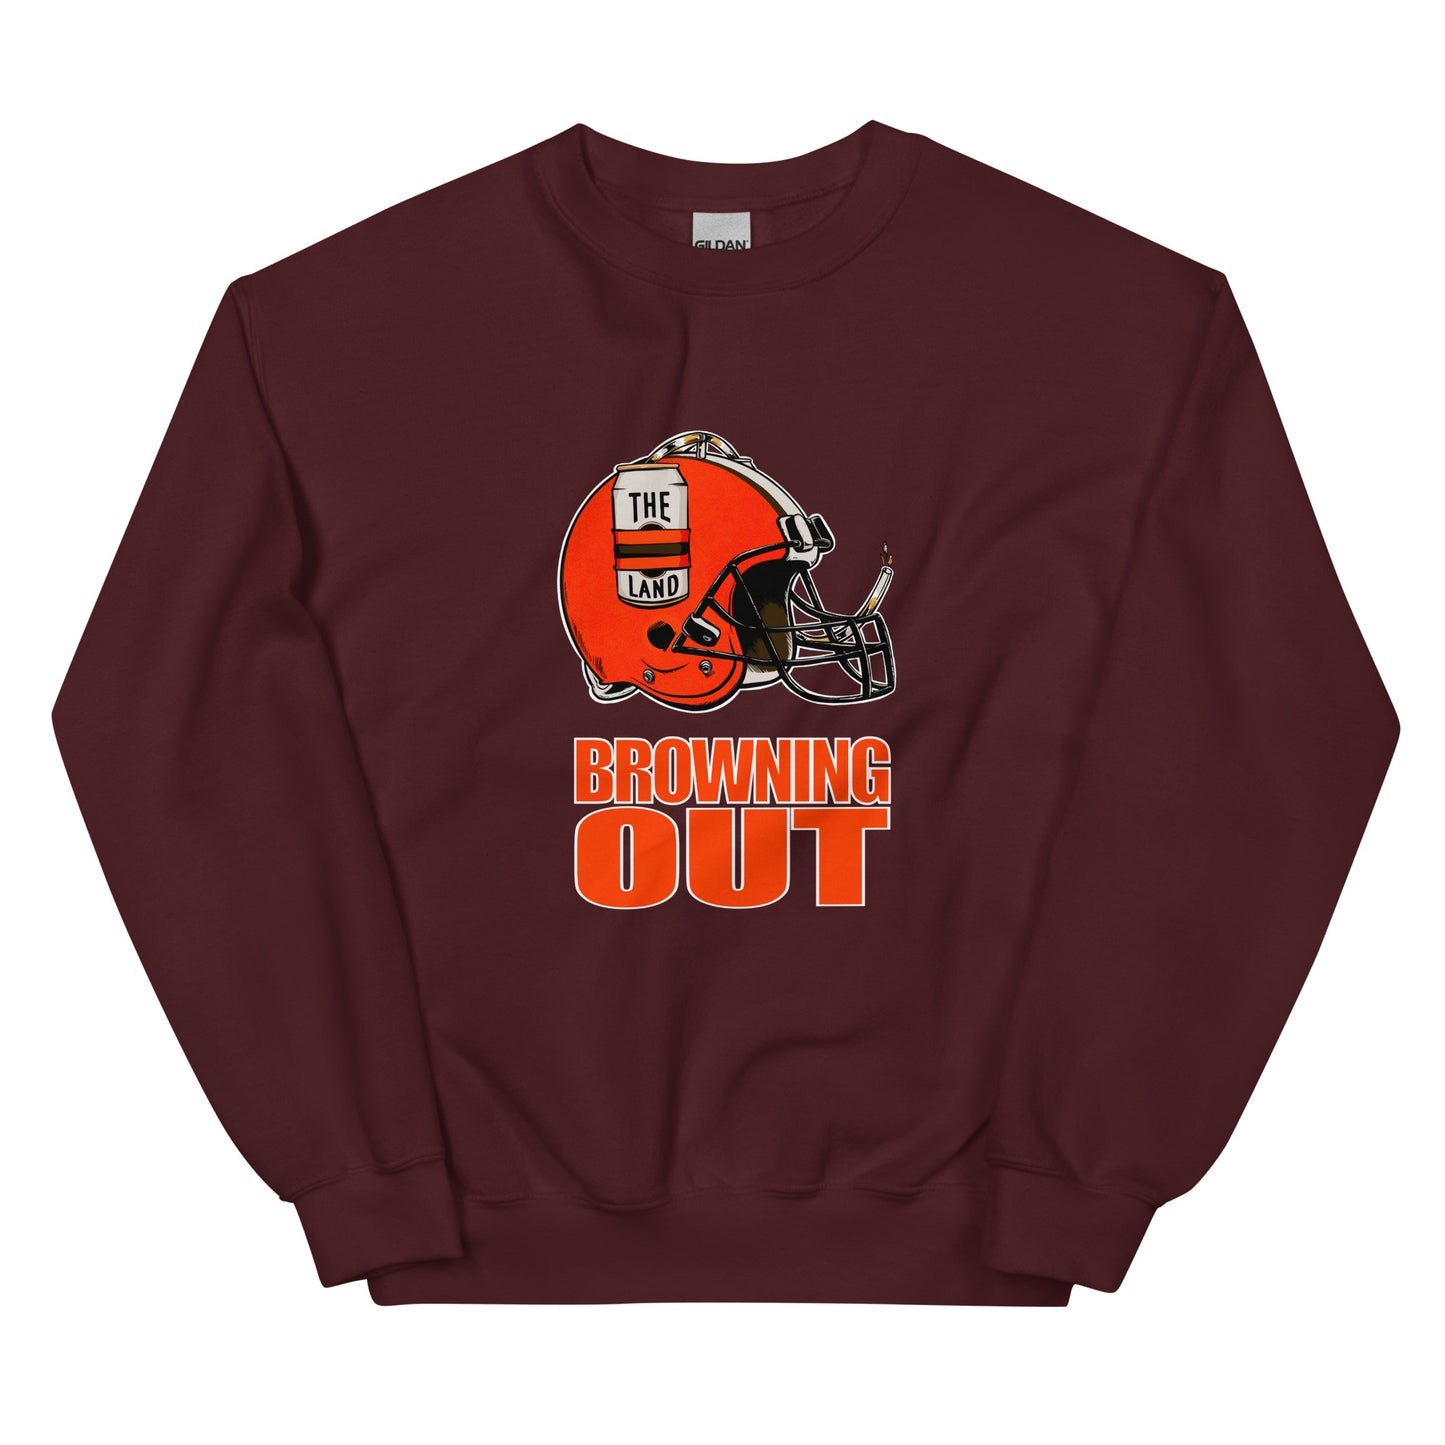 Browning Out Sweatshirt